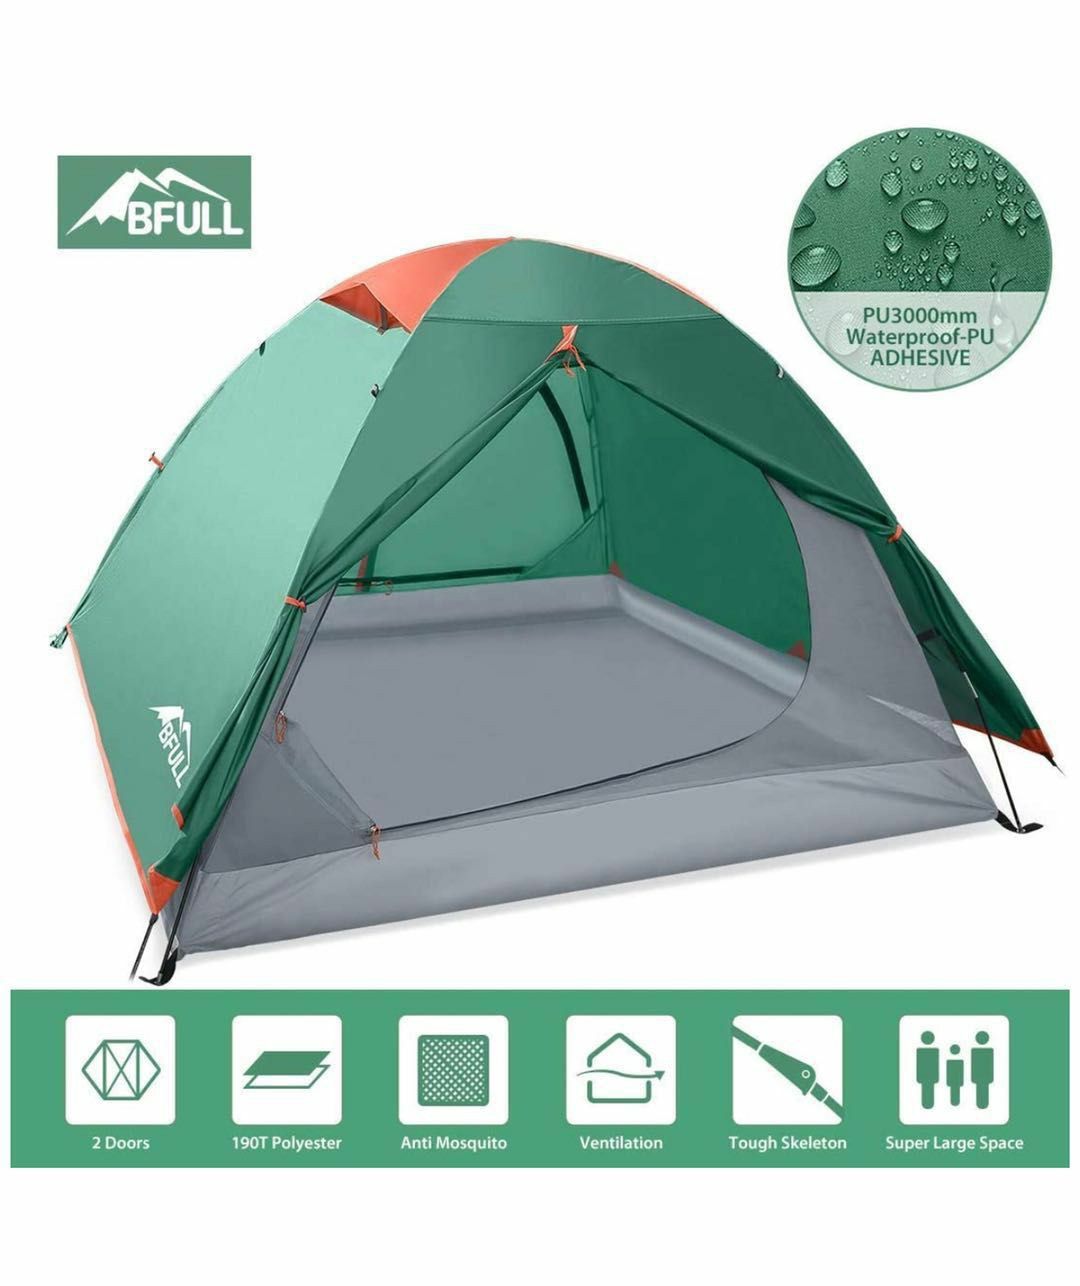 Camping Tents 2-3 Person Lightweight Backpacking Tents for Hiking Camping Outdoor Travel, Waterproof Pestproof Windproof Double Layer Dome Tent